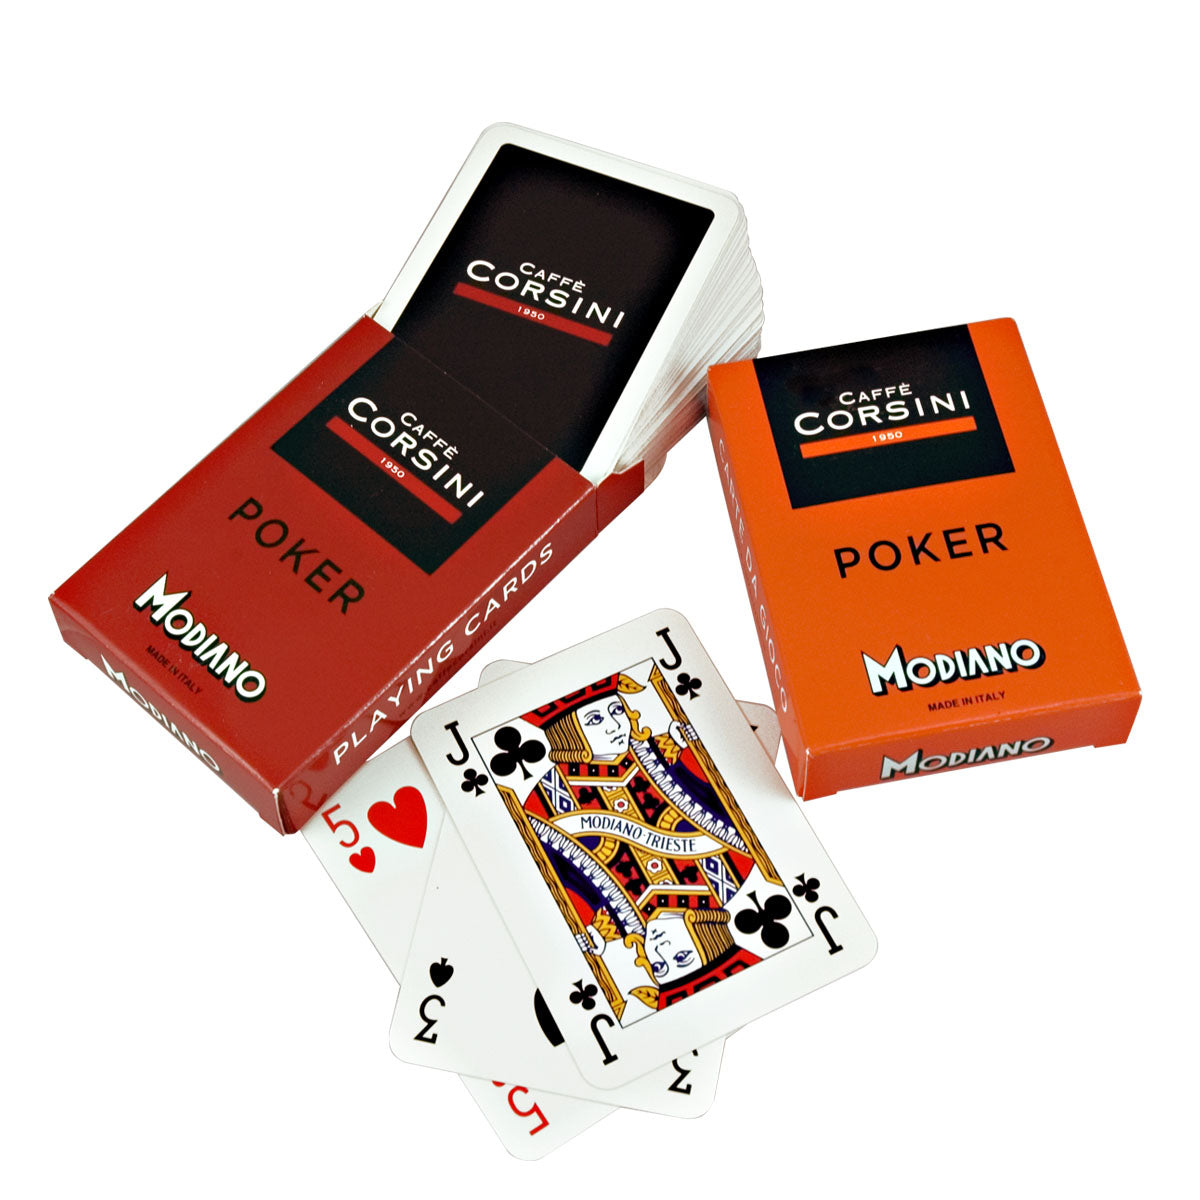 Branded playing cards | 2 decks x 55 Pcs each